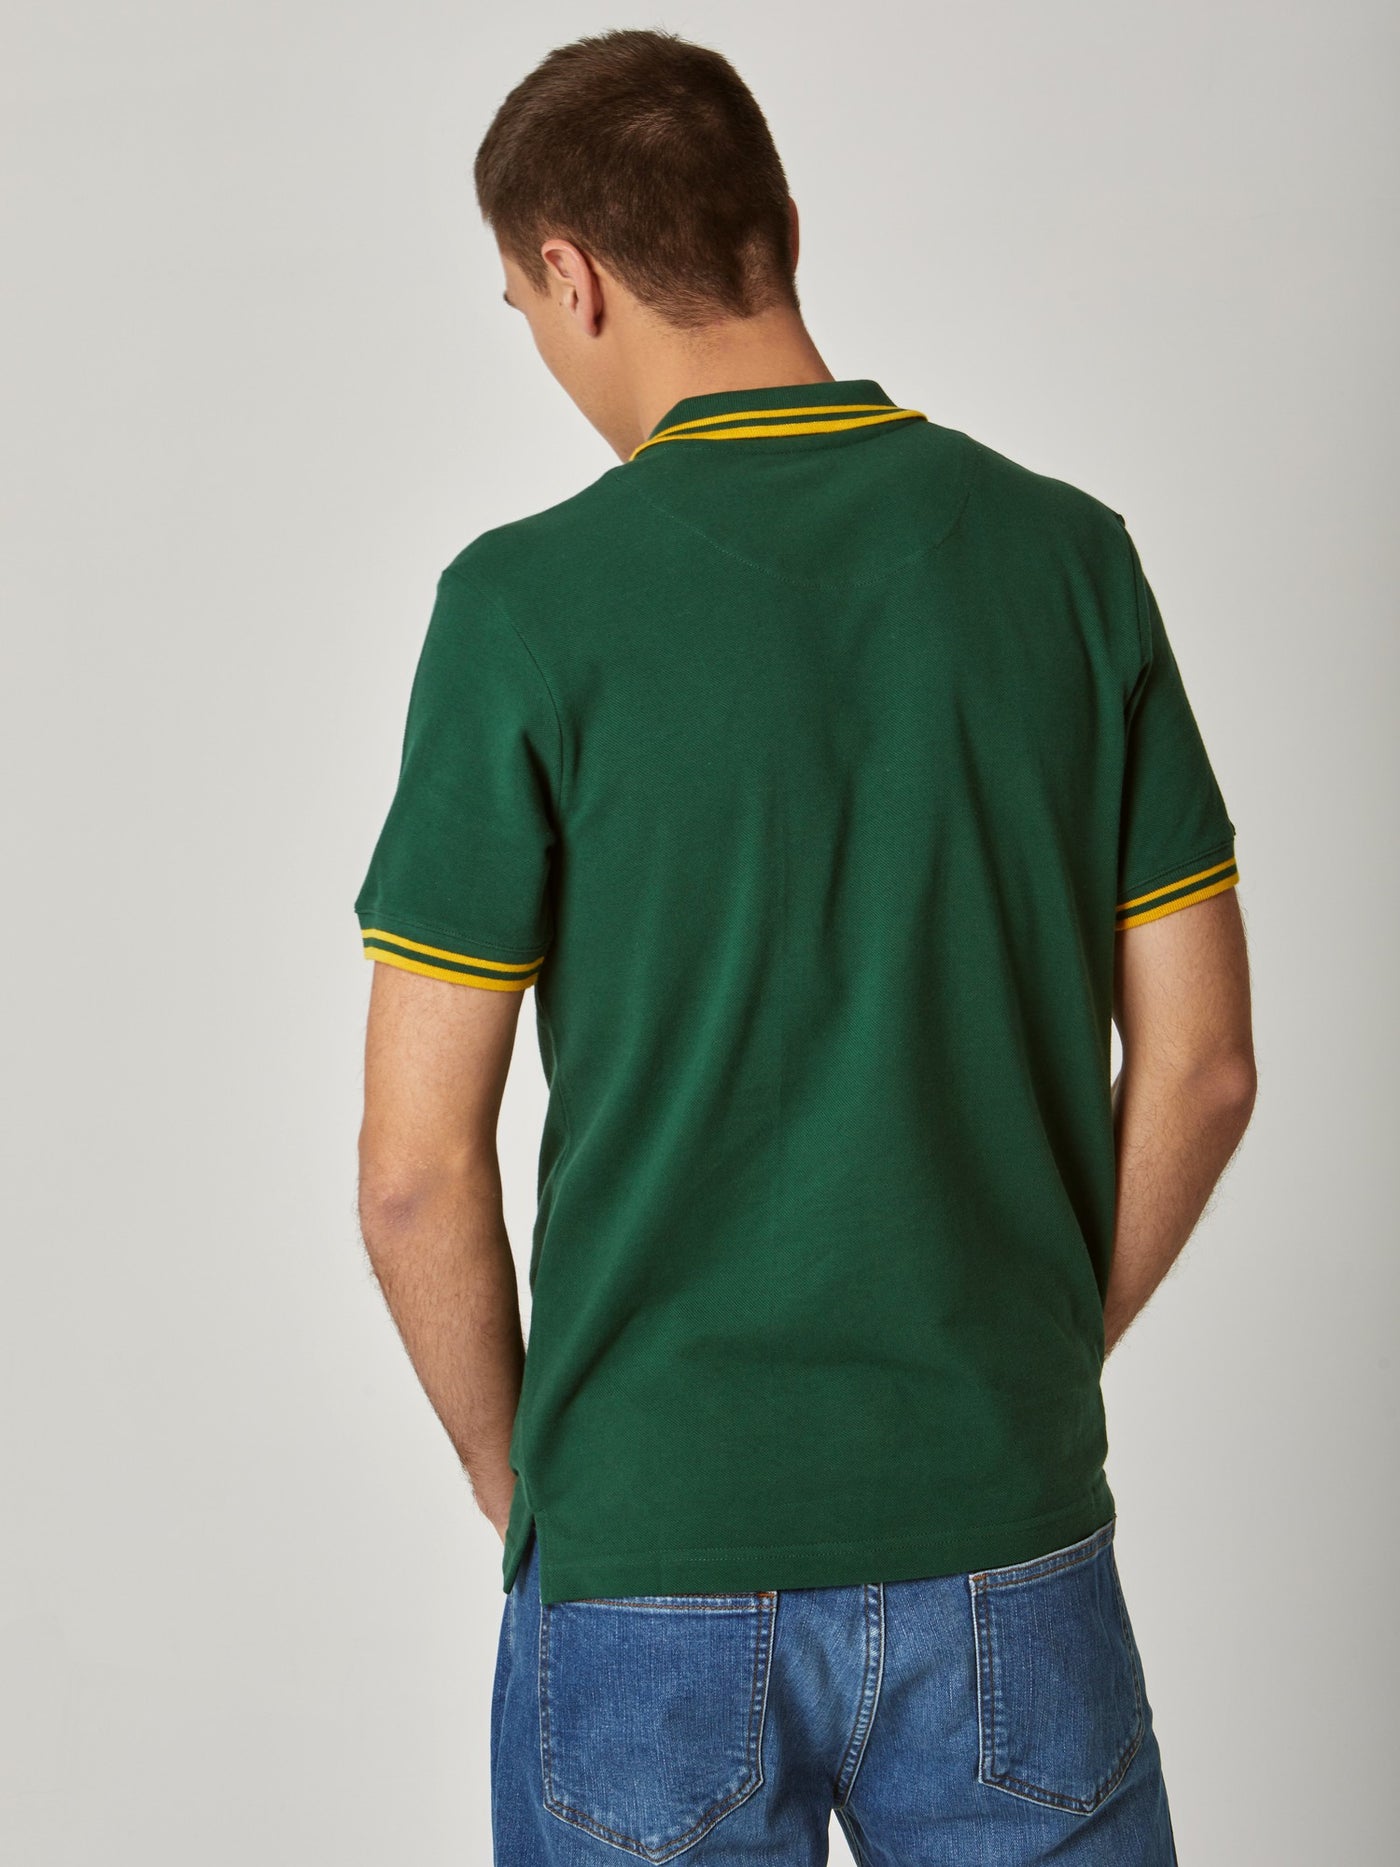 Polo Shirt - Chest Embroidery Design - Contrasting Trims